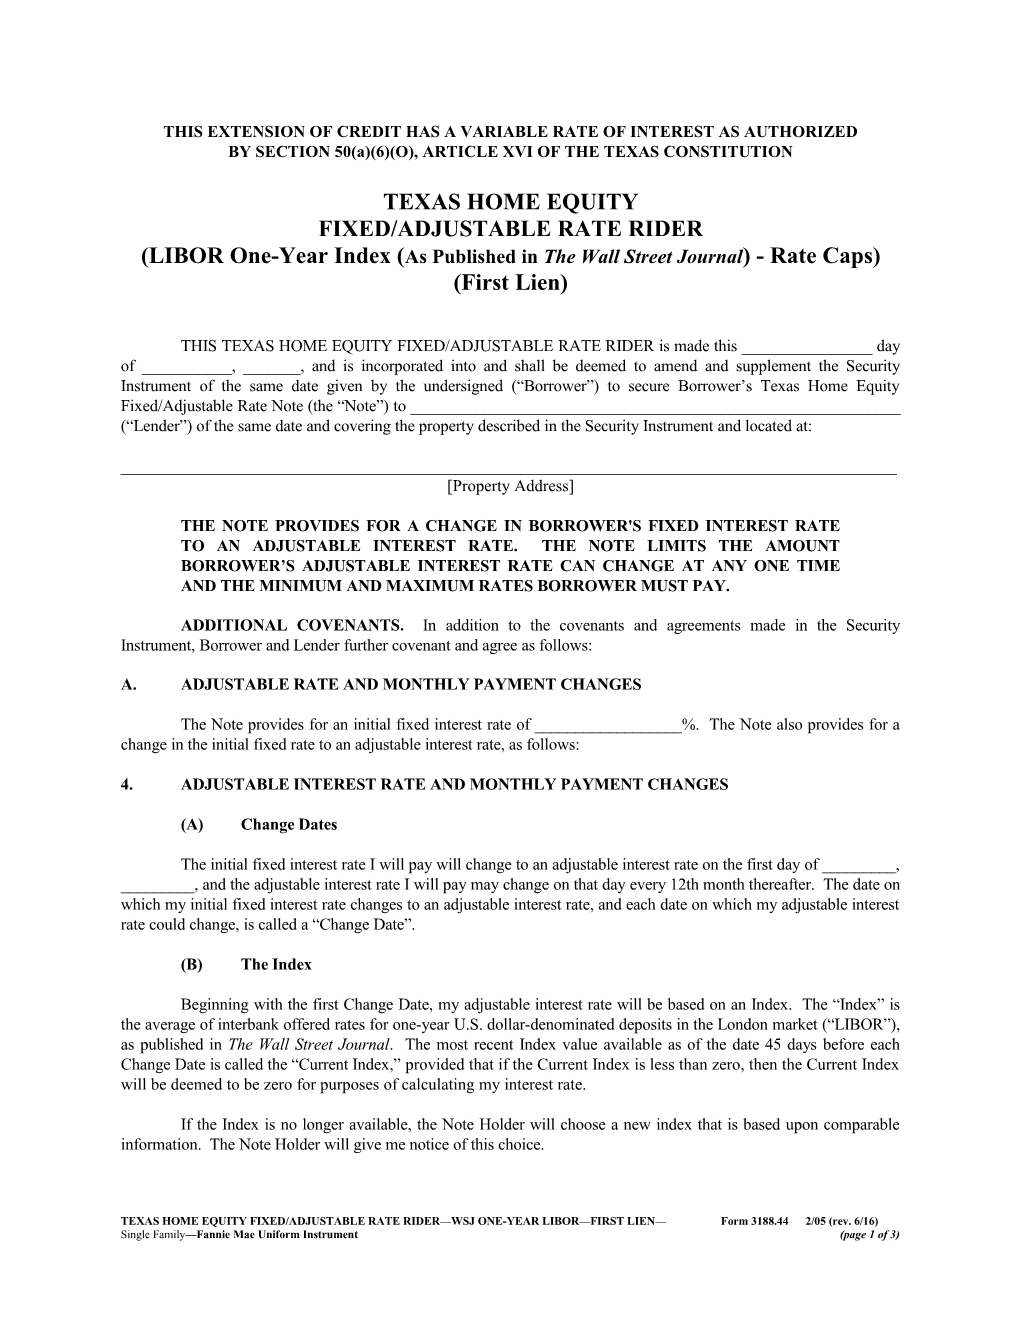 Texas Riders and Addenda (Form 3188.44): Word